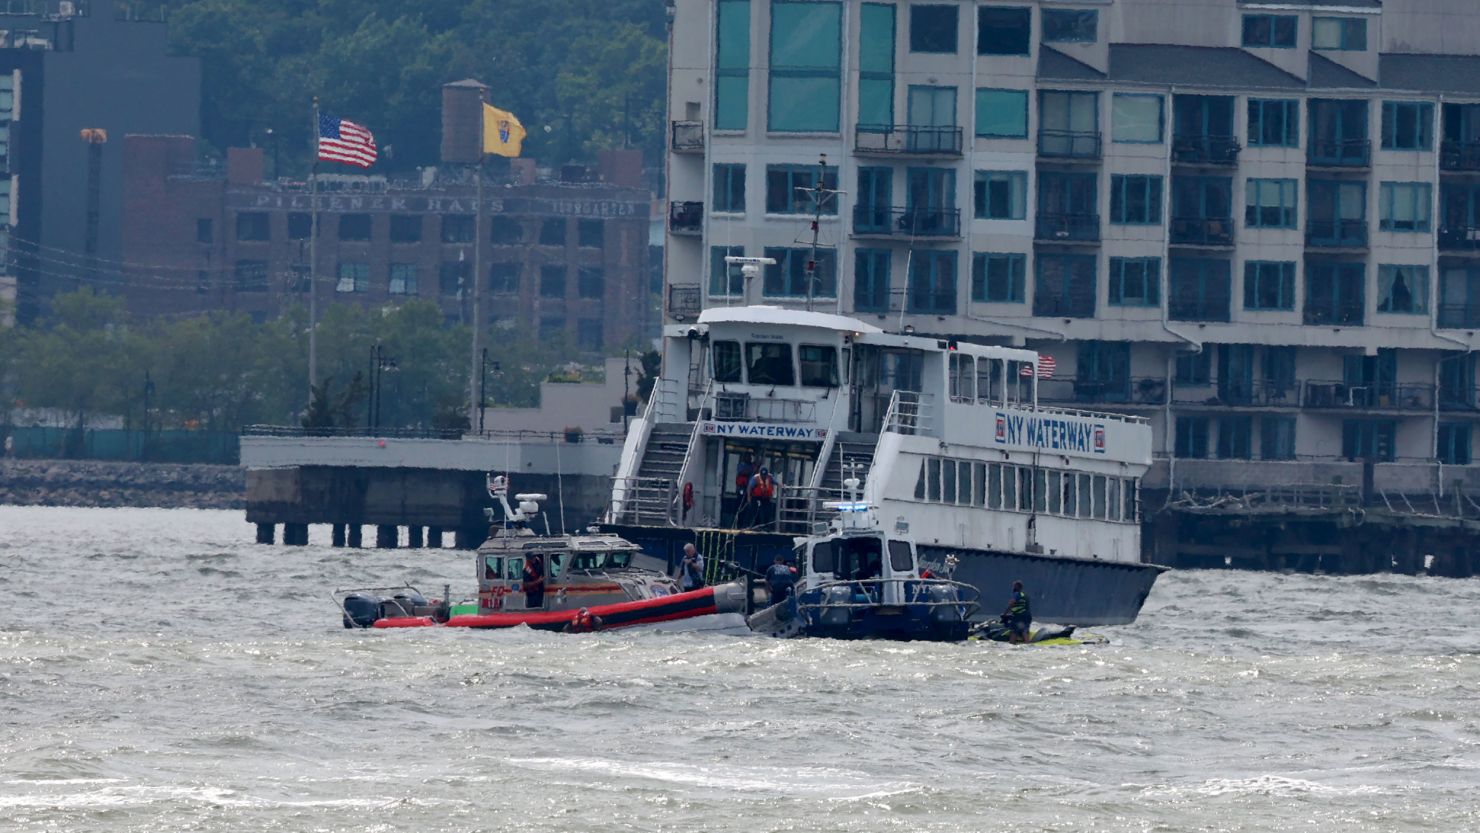 NYPD and FDNY scuba dive teams and a NY Waterway Ferry float near the boat accident on the Hudson River in 2022.